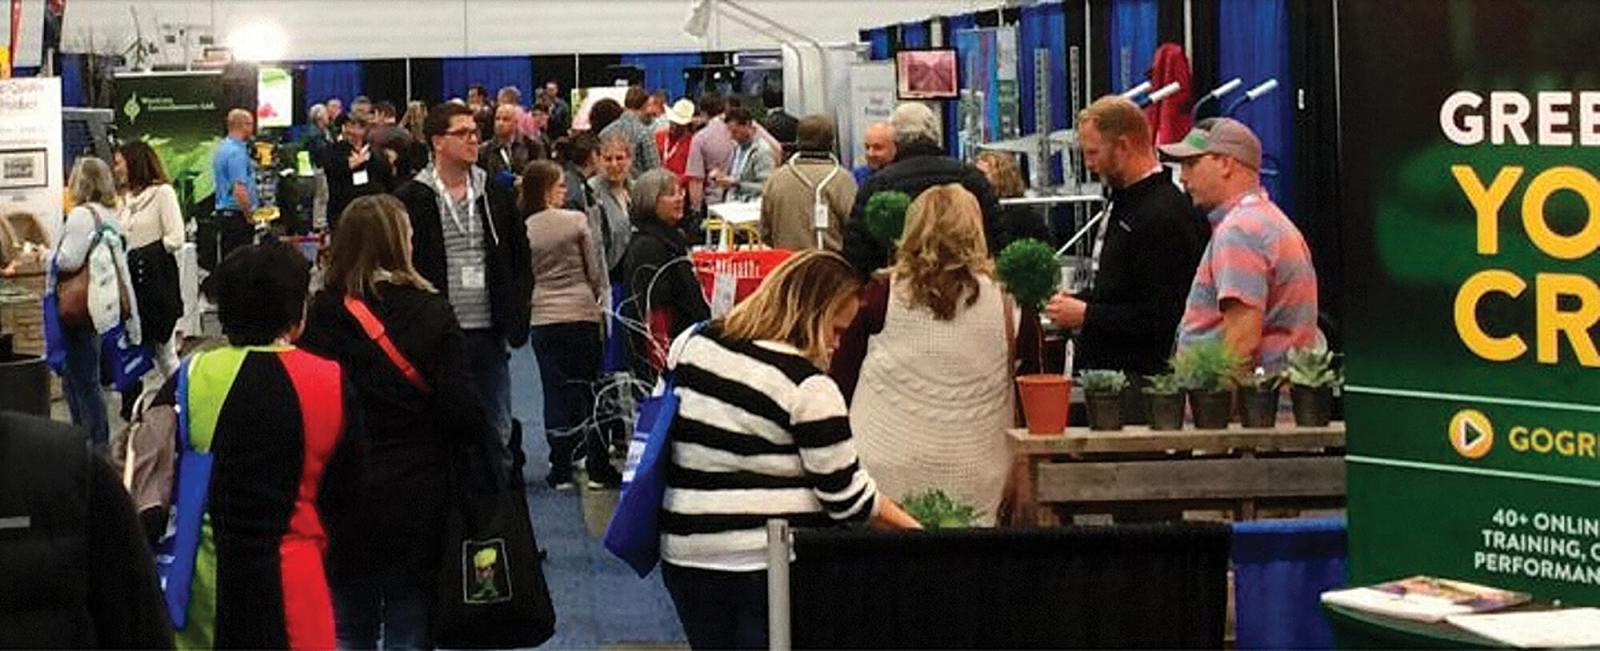 GISC will be three days filled with conferences, workshops and a tradeshow featuring suppliers, growers and dealers.